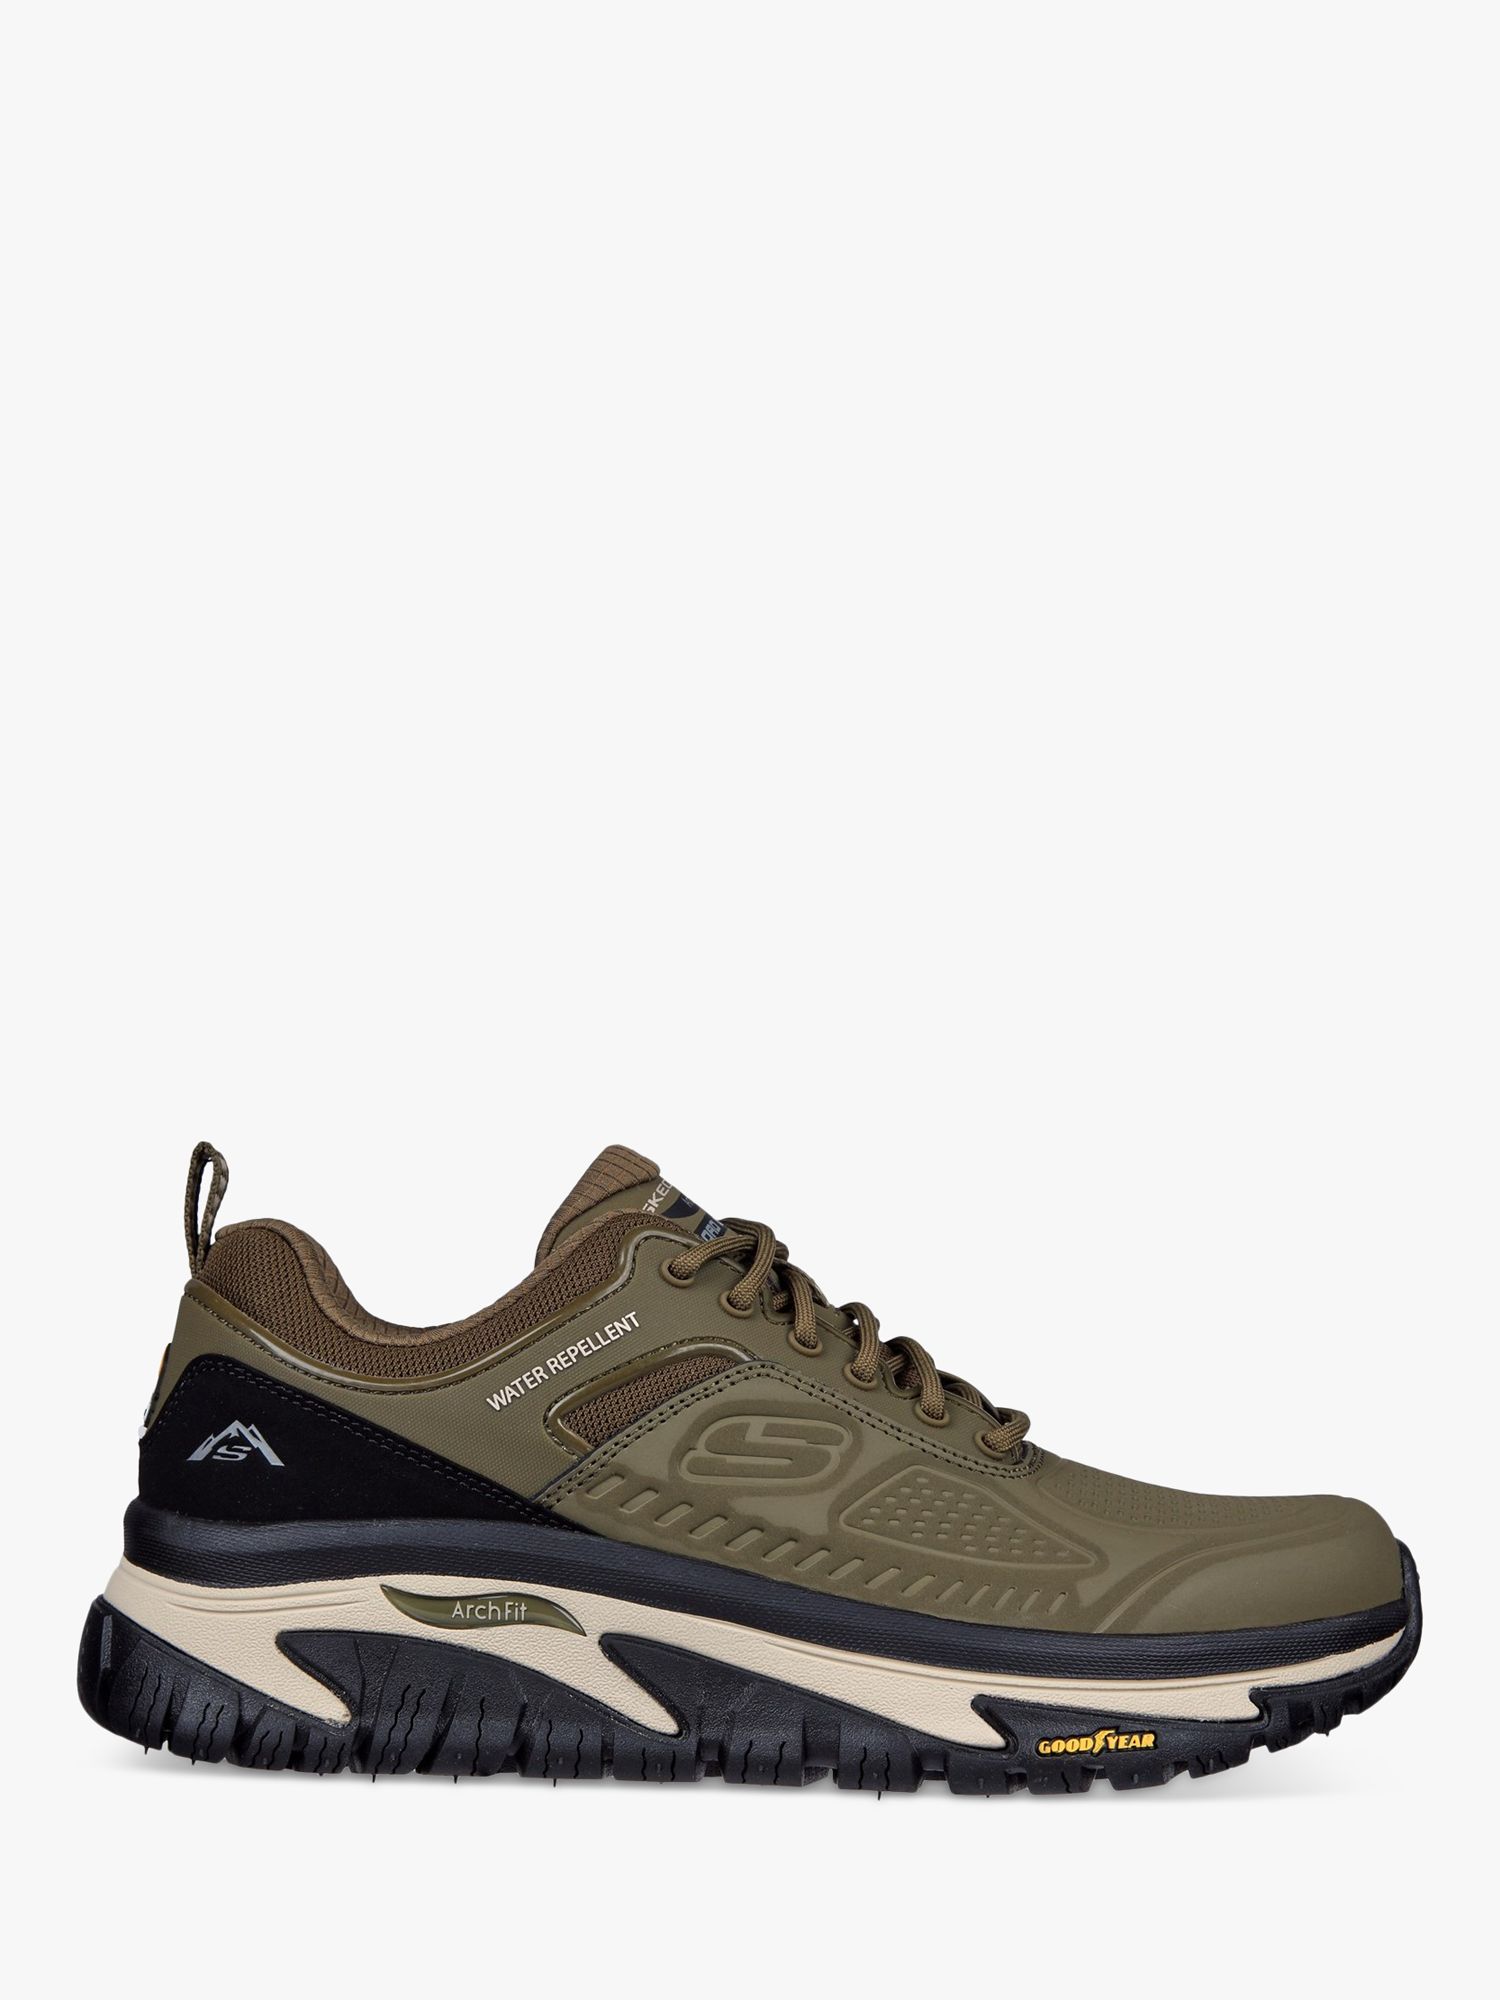 Skechers Relaxed Fit Arch Fit Recon Road Walker Shoes